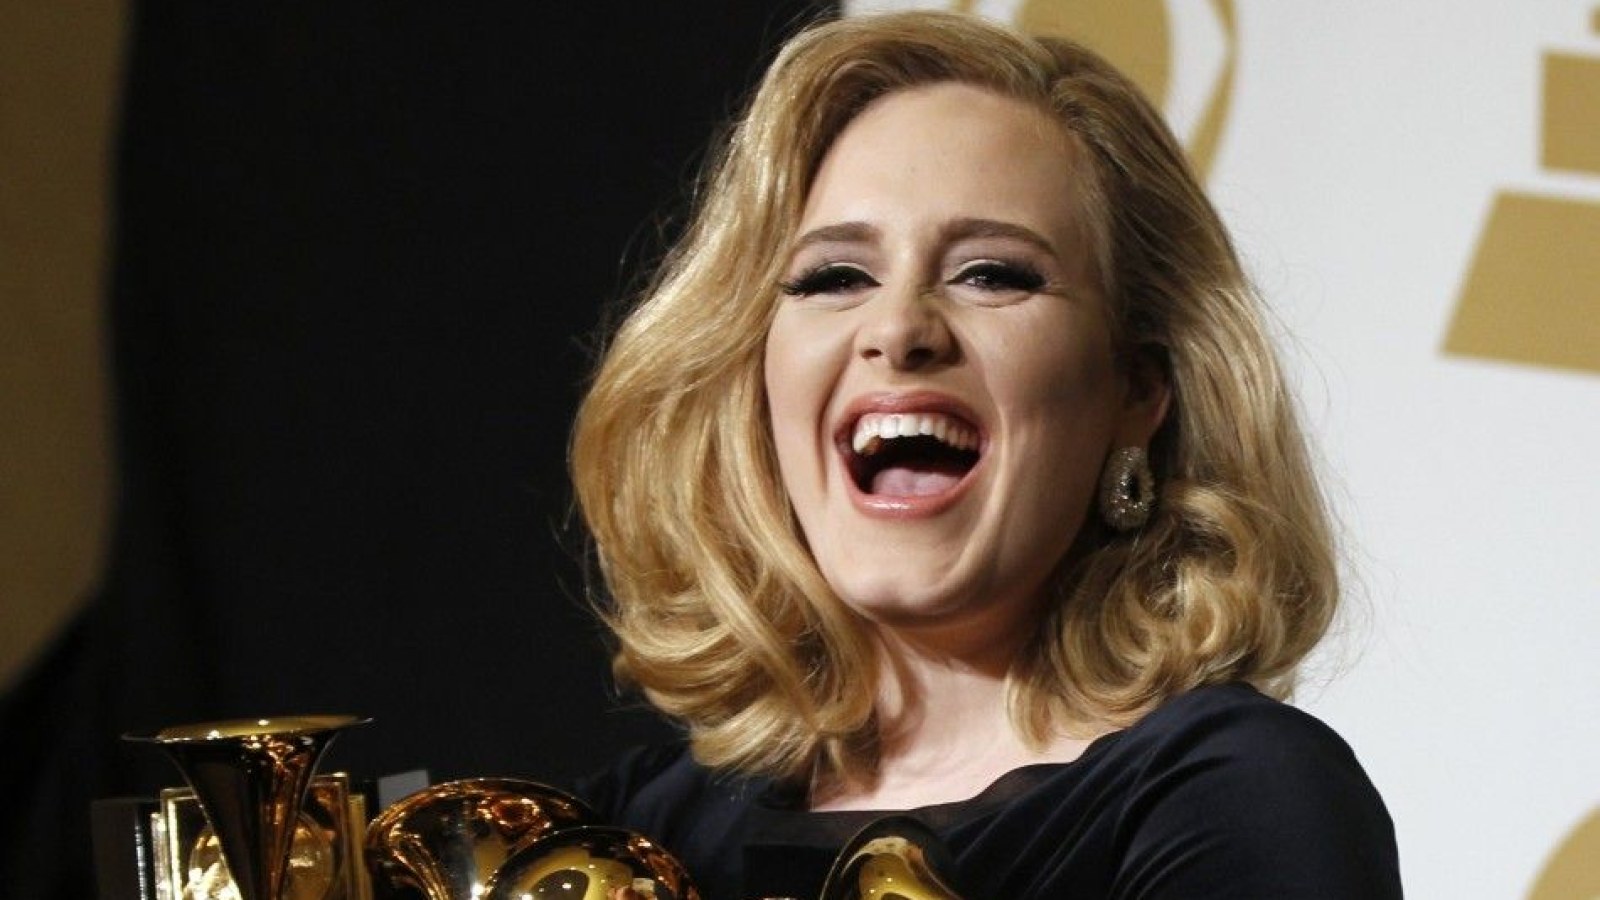 Grammys 2012: Adele Makes a Clean Sweep on Somber Night – Billboard